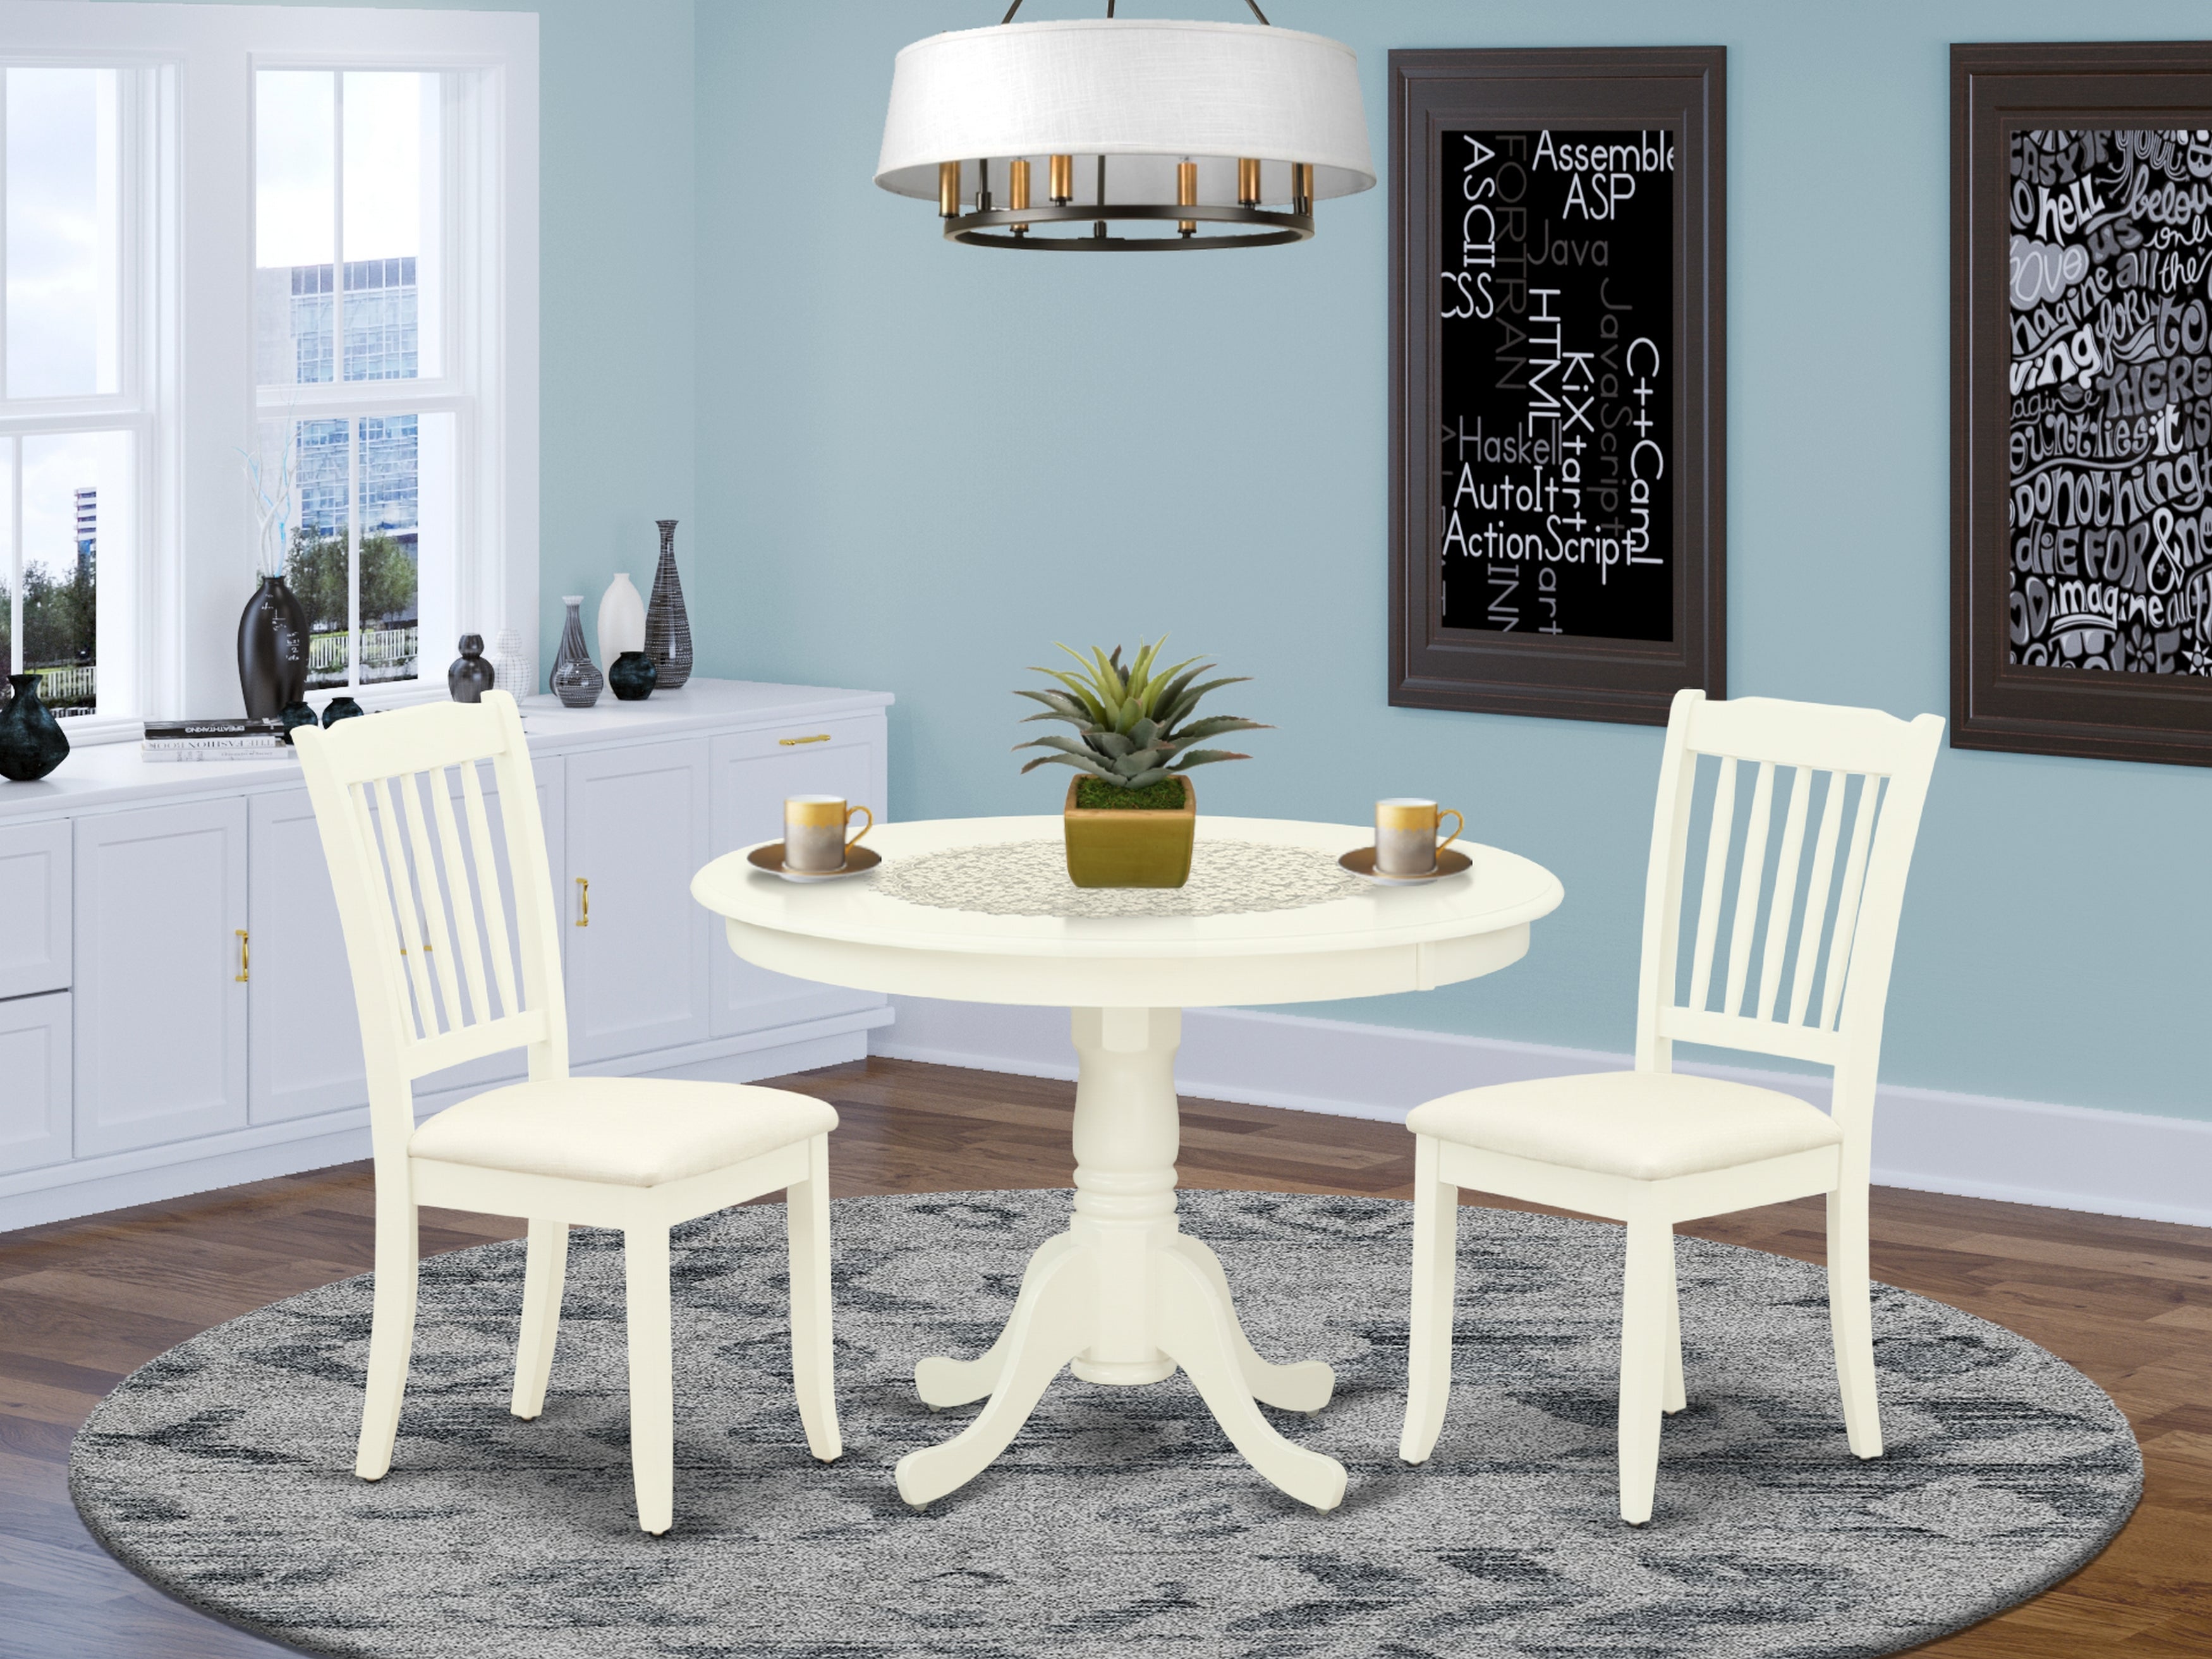 HLDA3-LWH-C 3Pc Dinette Set Includes a Rounded Kitchen Table and Two Vertical Slatted Microfiber Seat Dining Chairs, Linen White Finish